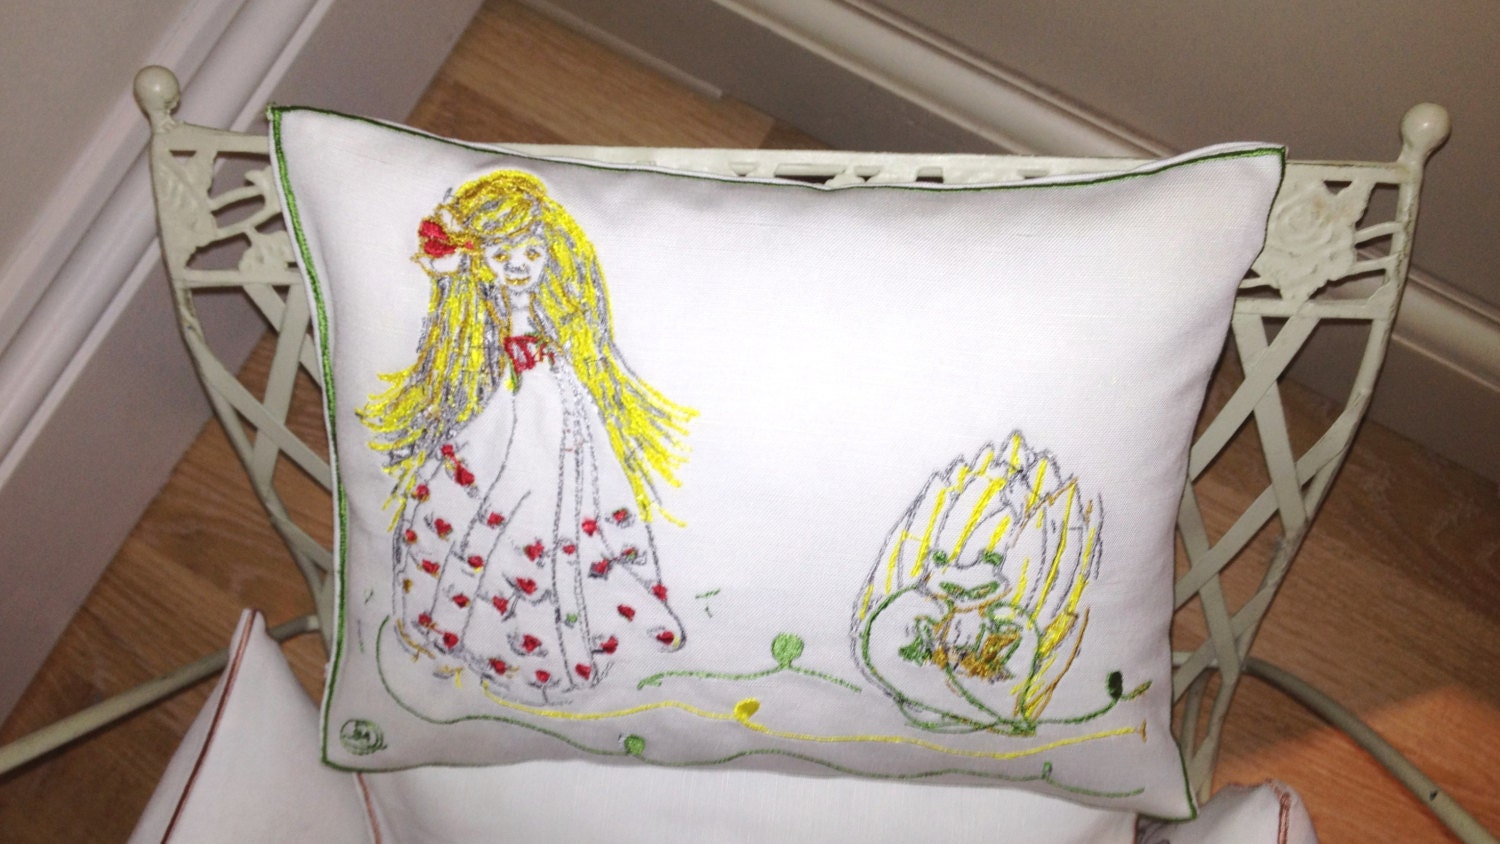 Heart Princess and the Frog-Artistic Textured Embroidery - Throw Cushion